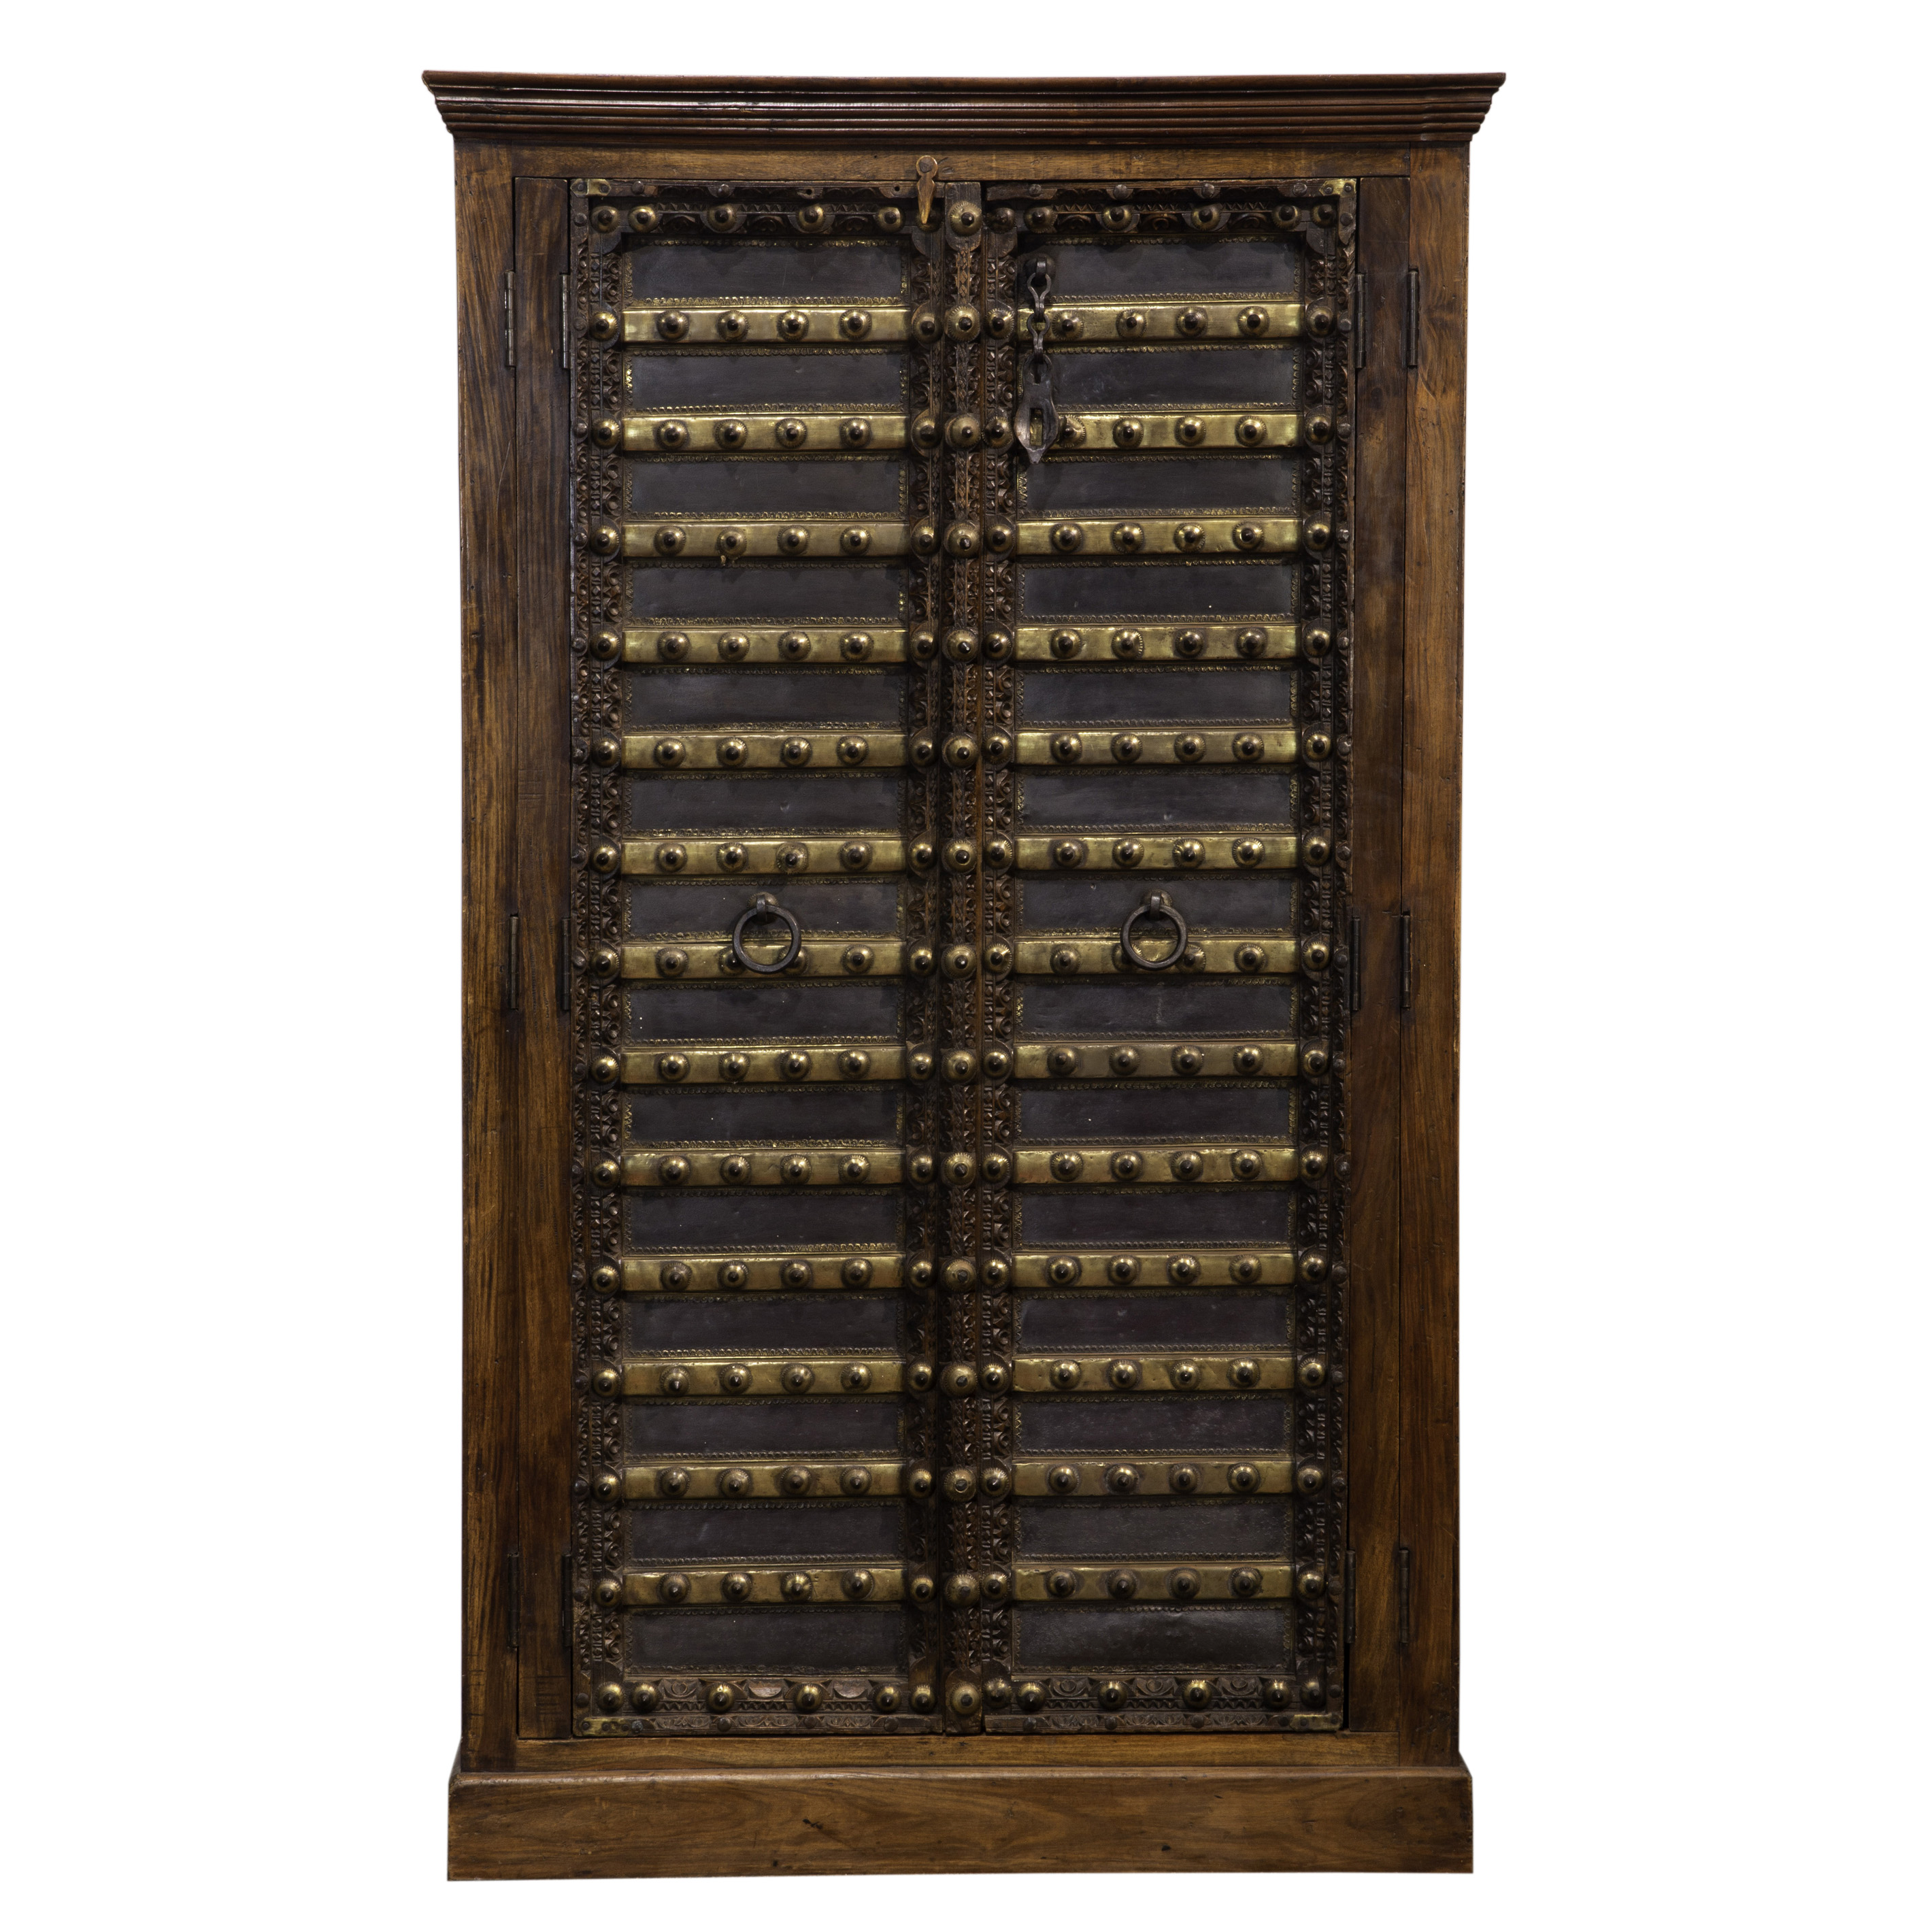 LARGE EXOTIC WOOD ARMOIRE Large